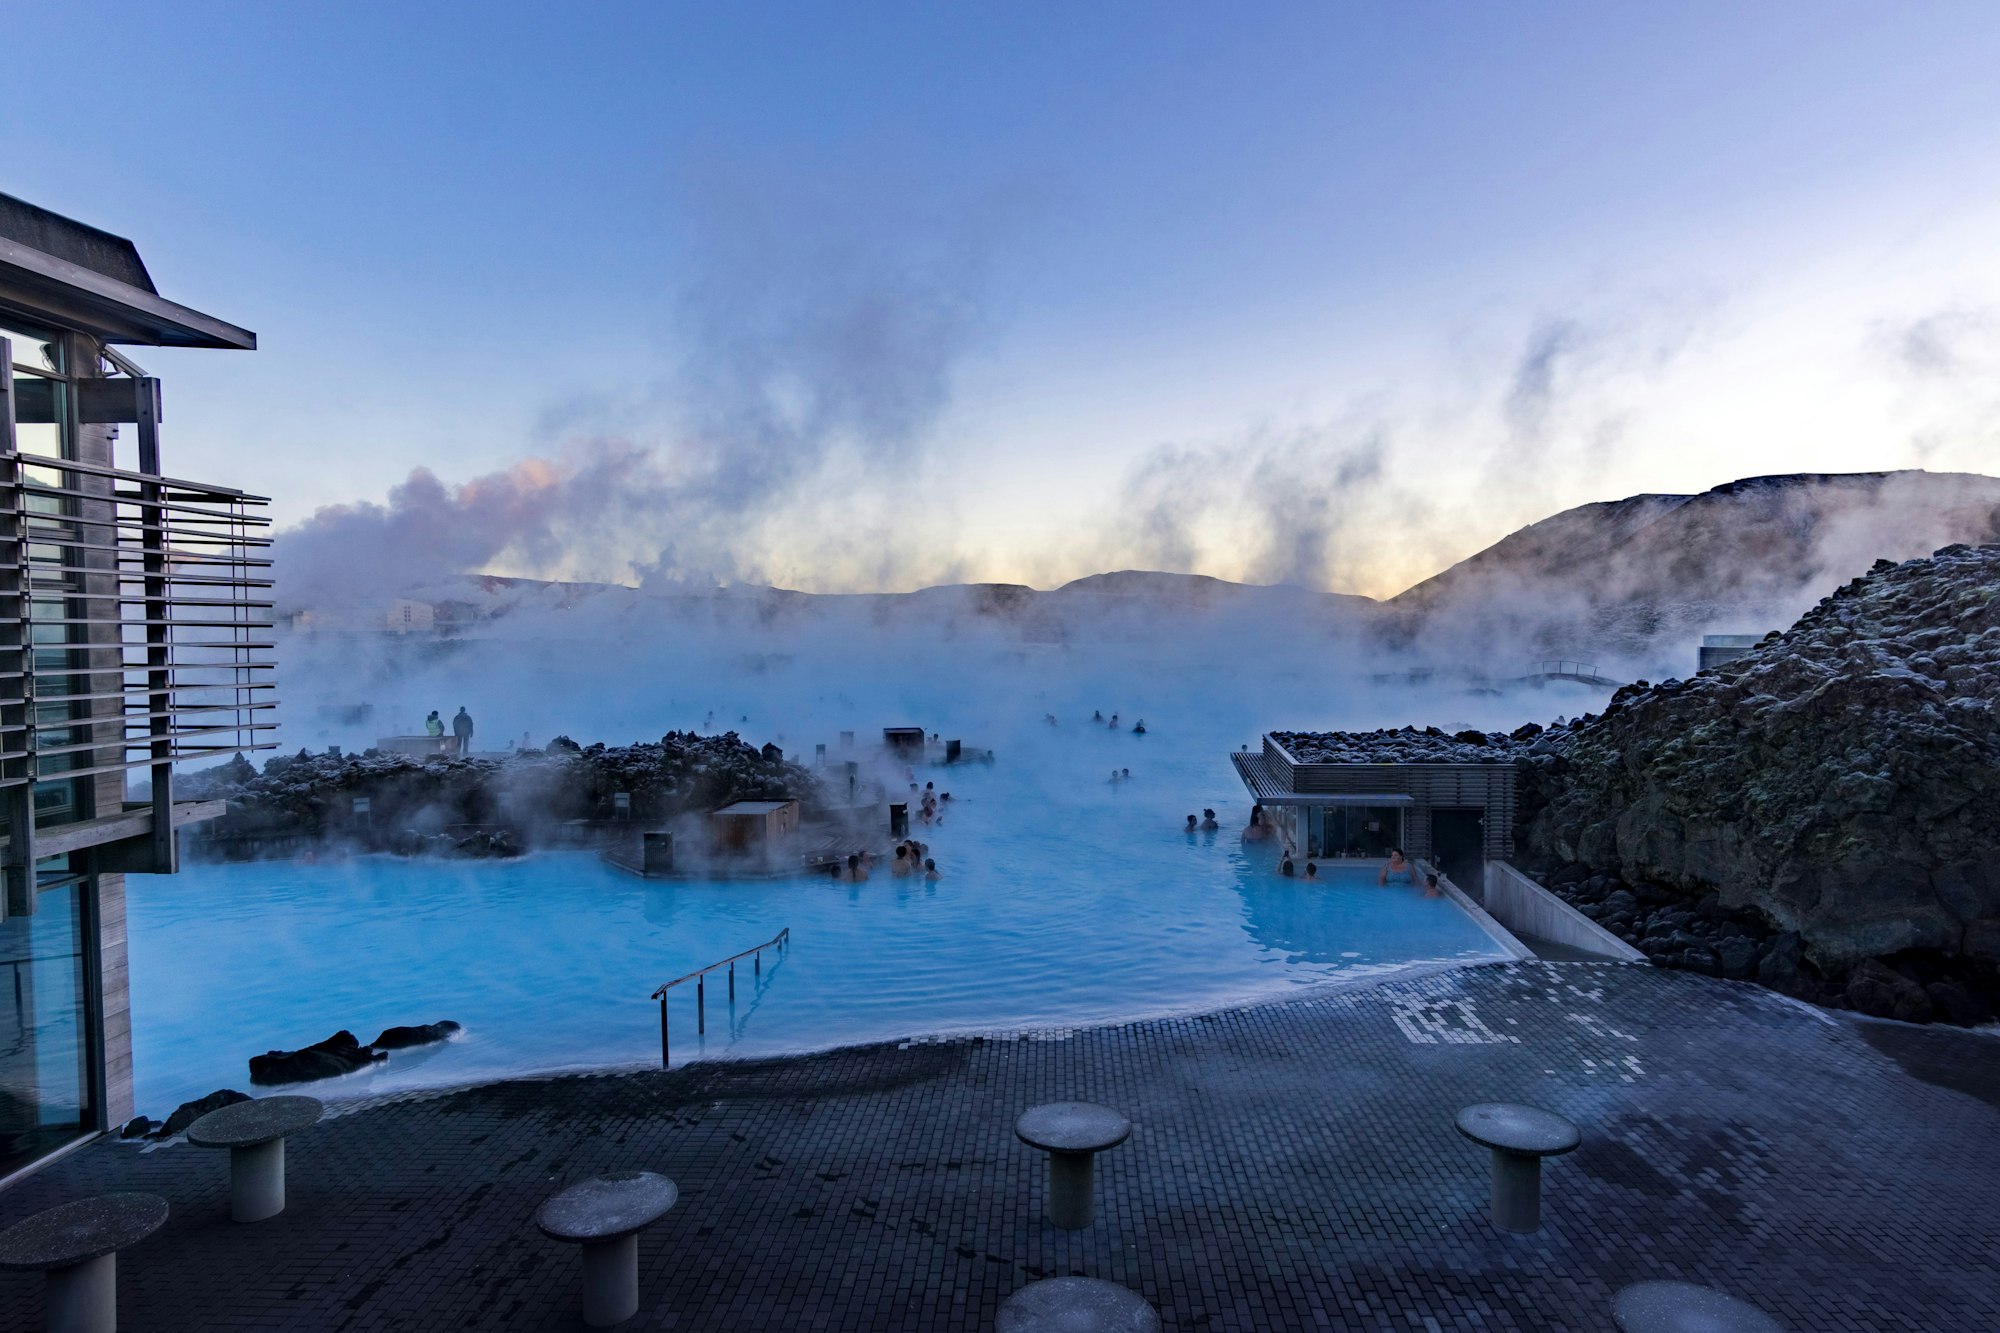 Iceland's famous Blue Lagoon with the natural steam raising to the sky, the bright blue water and the sun setting in the background. 